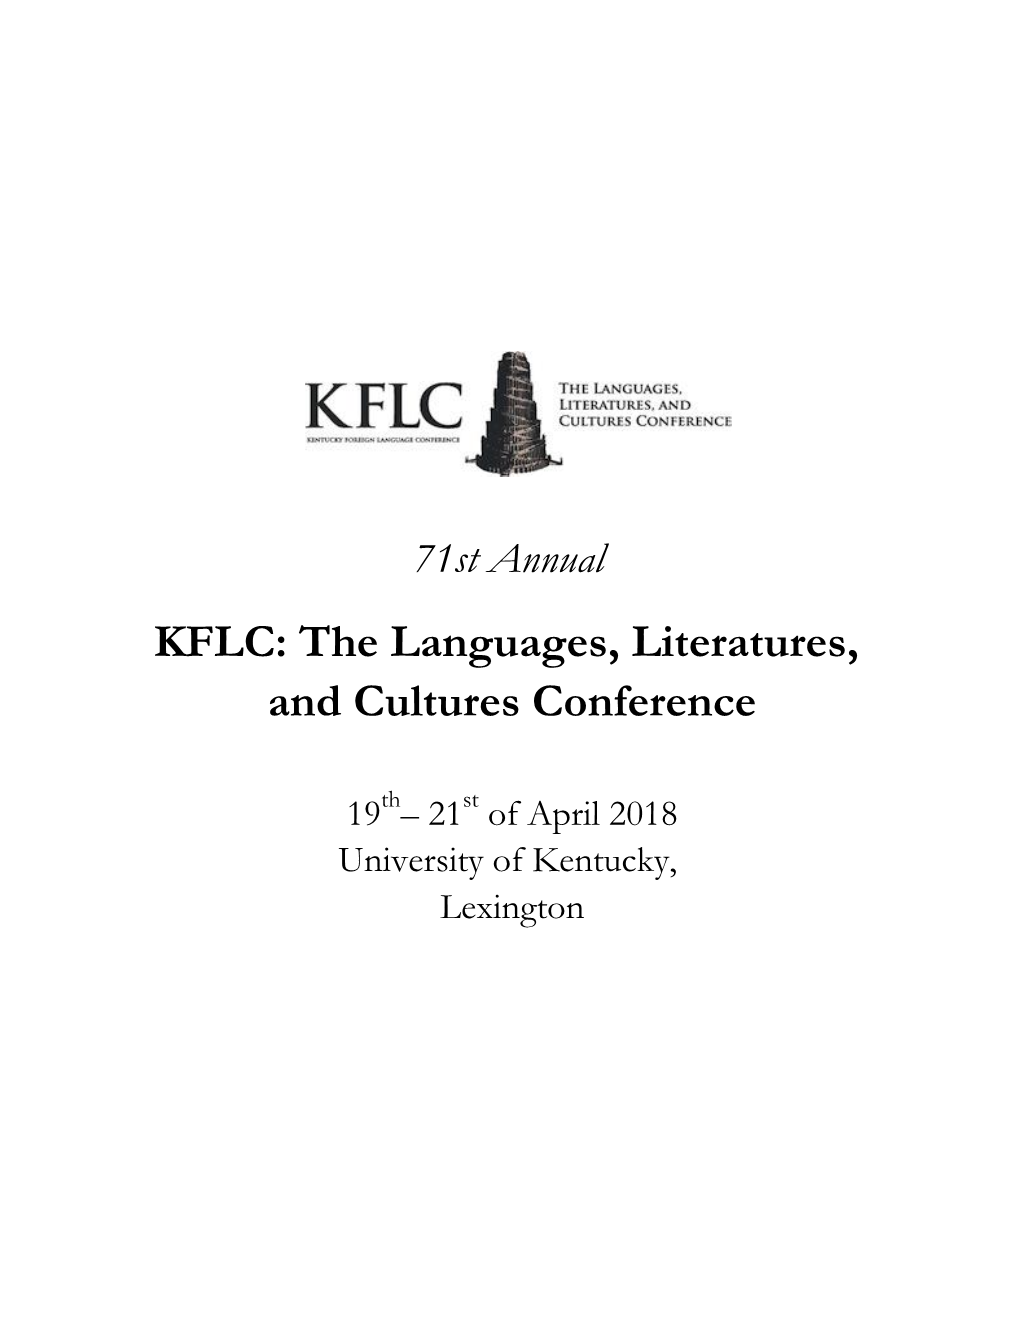 71St Annual KFLC: the Languages, Literatures, and Cultures Conference